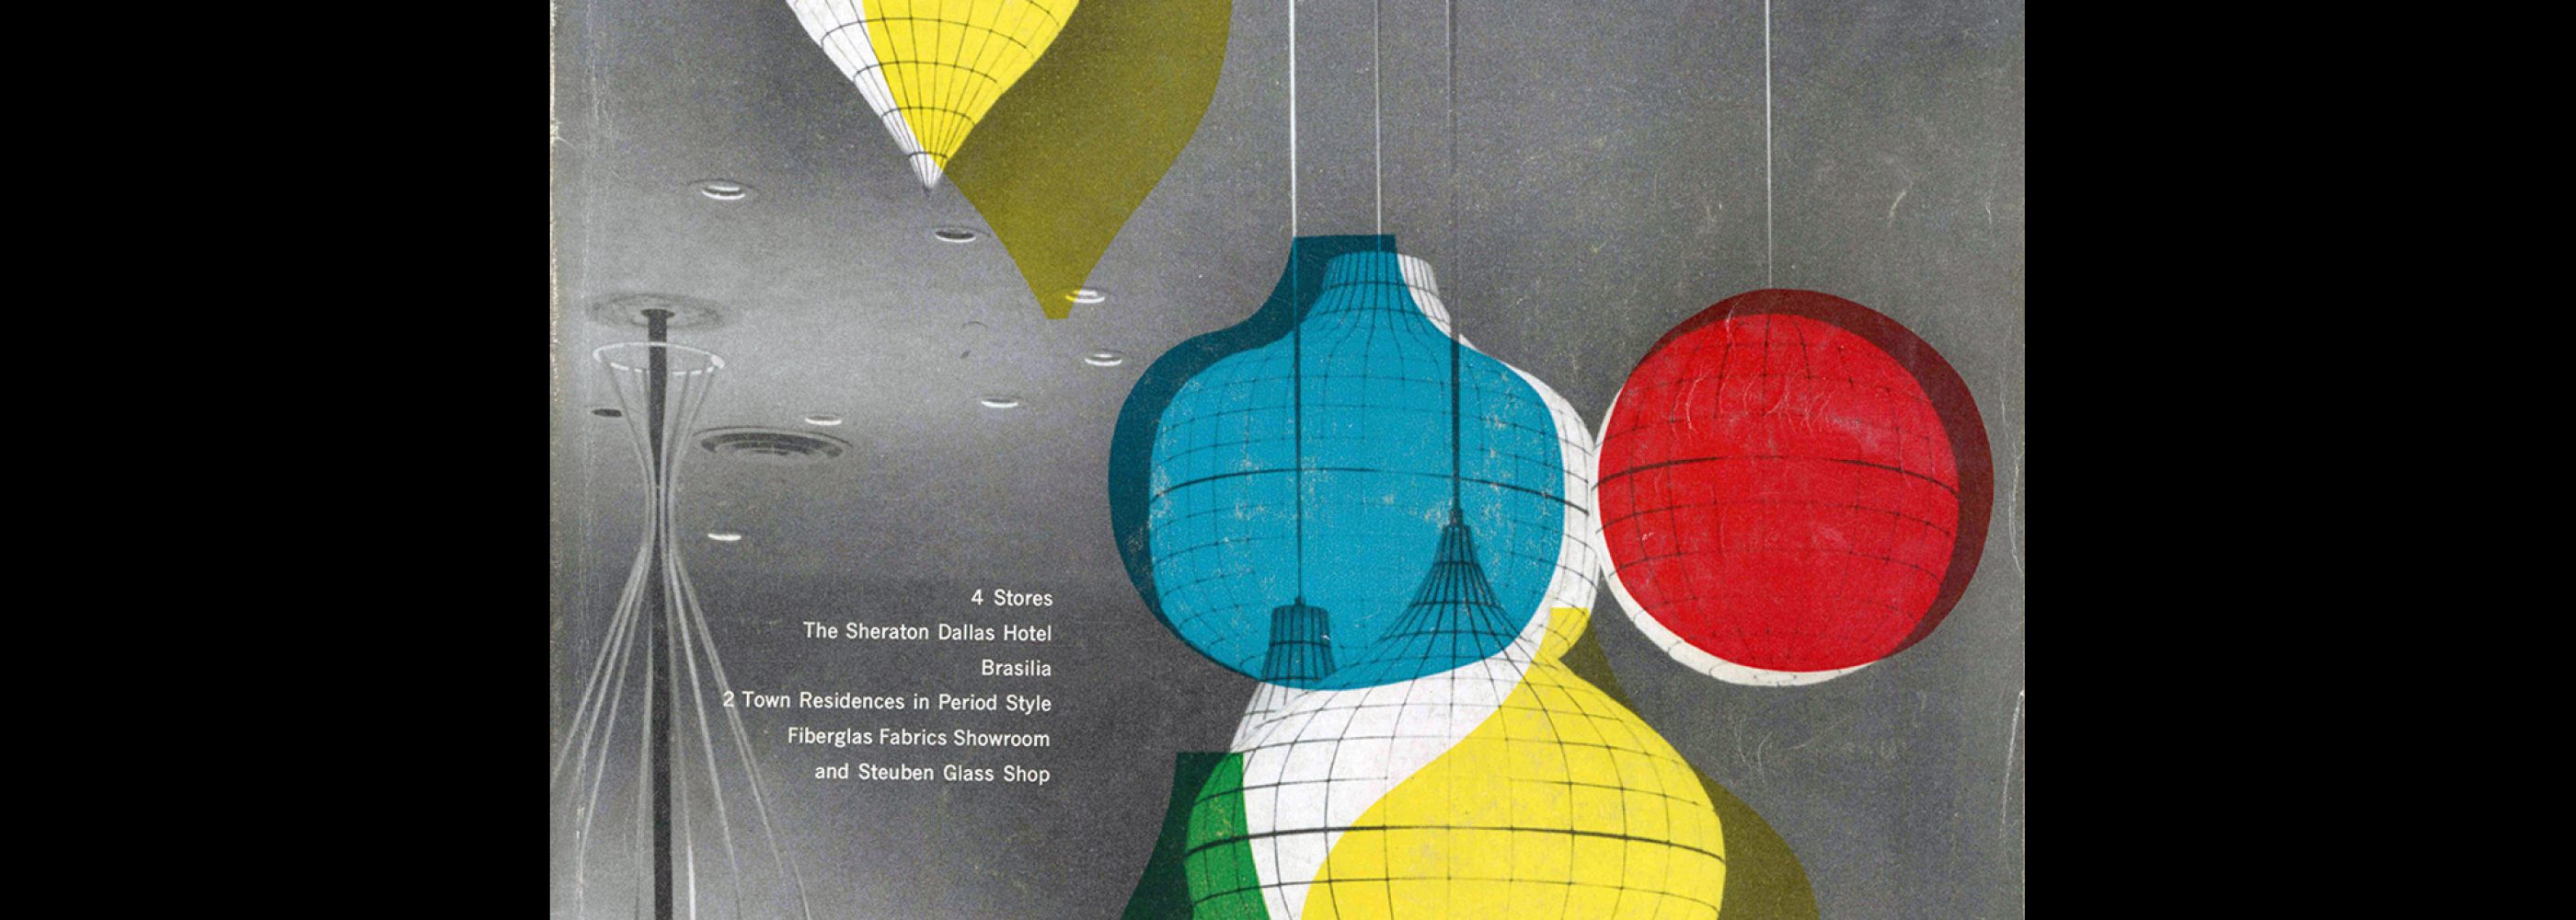 Interiors, June 1959. Cover design by Arnold Saks